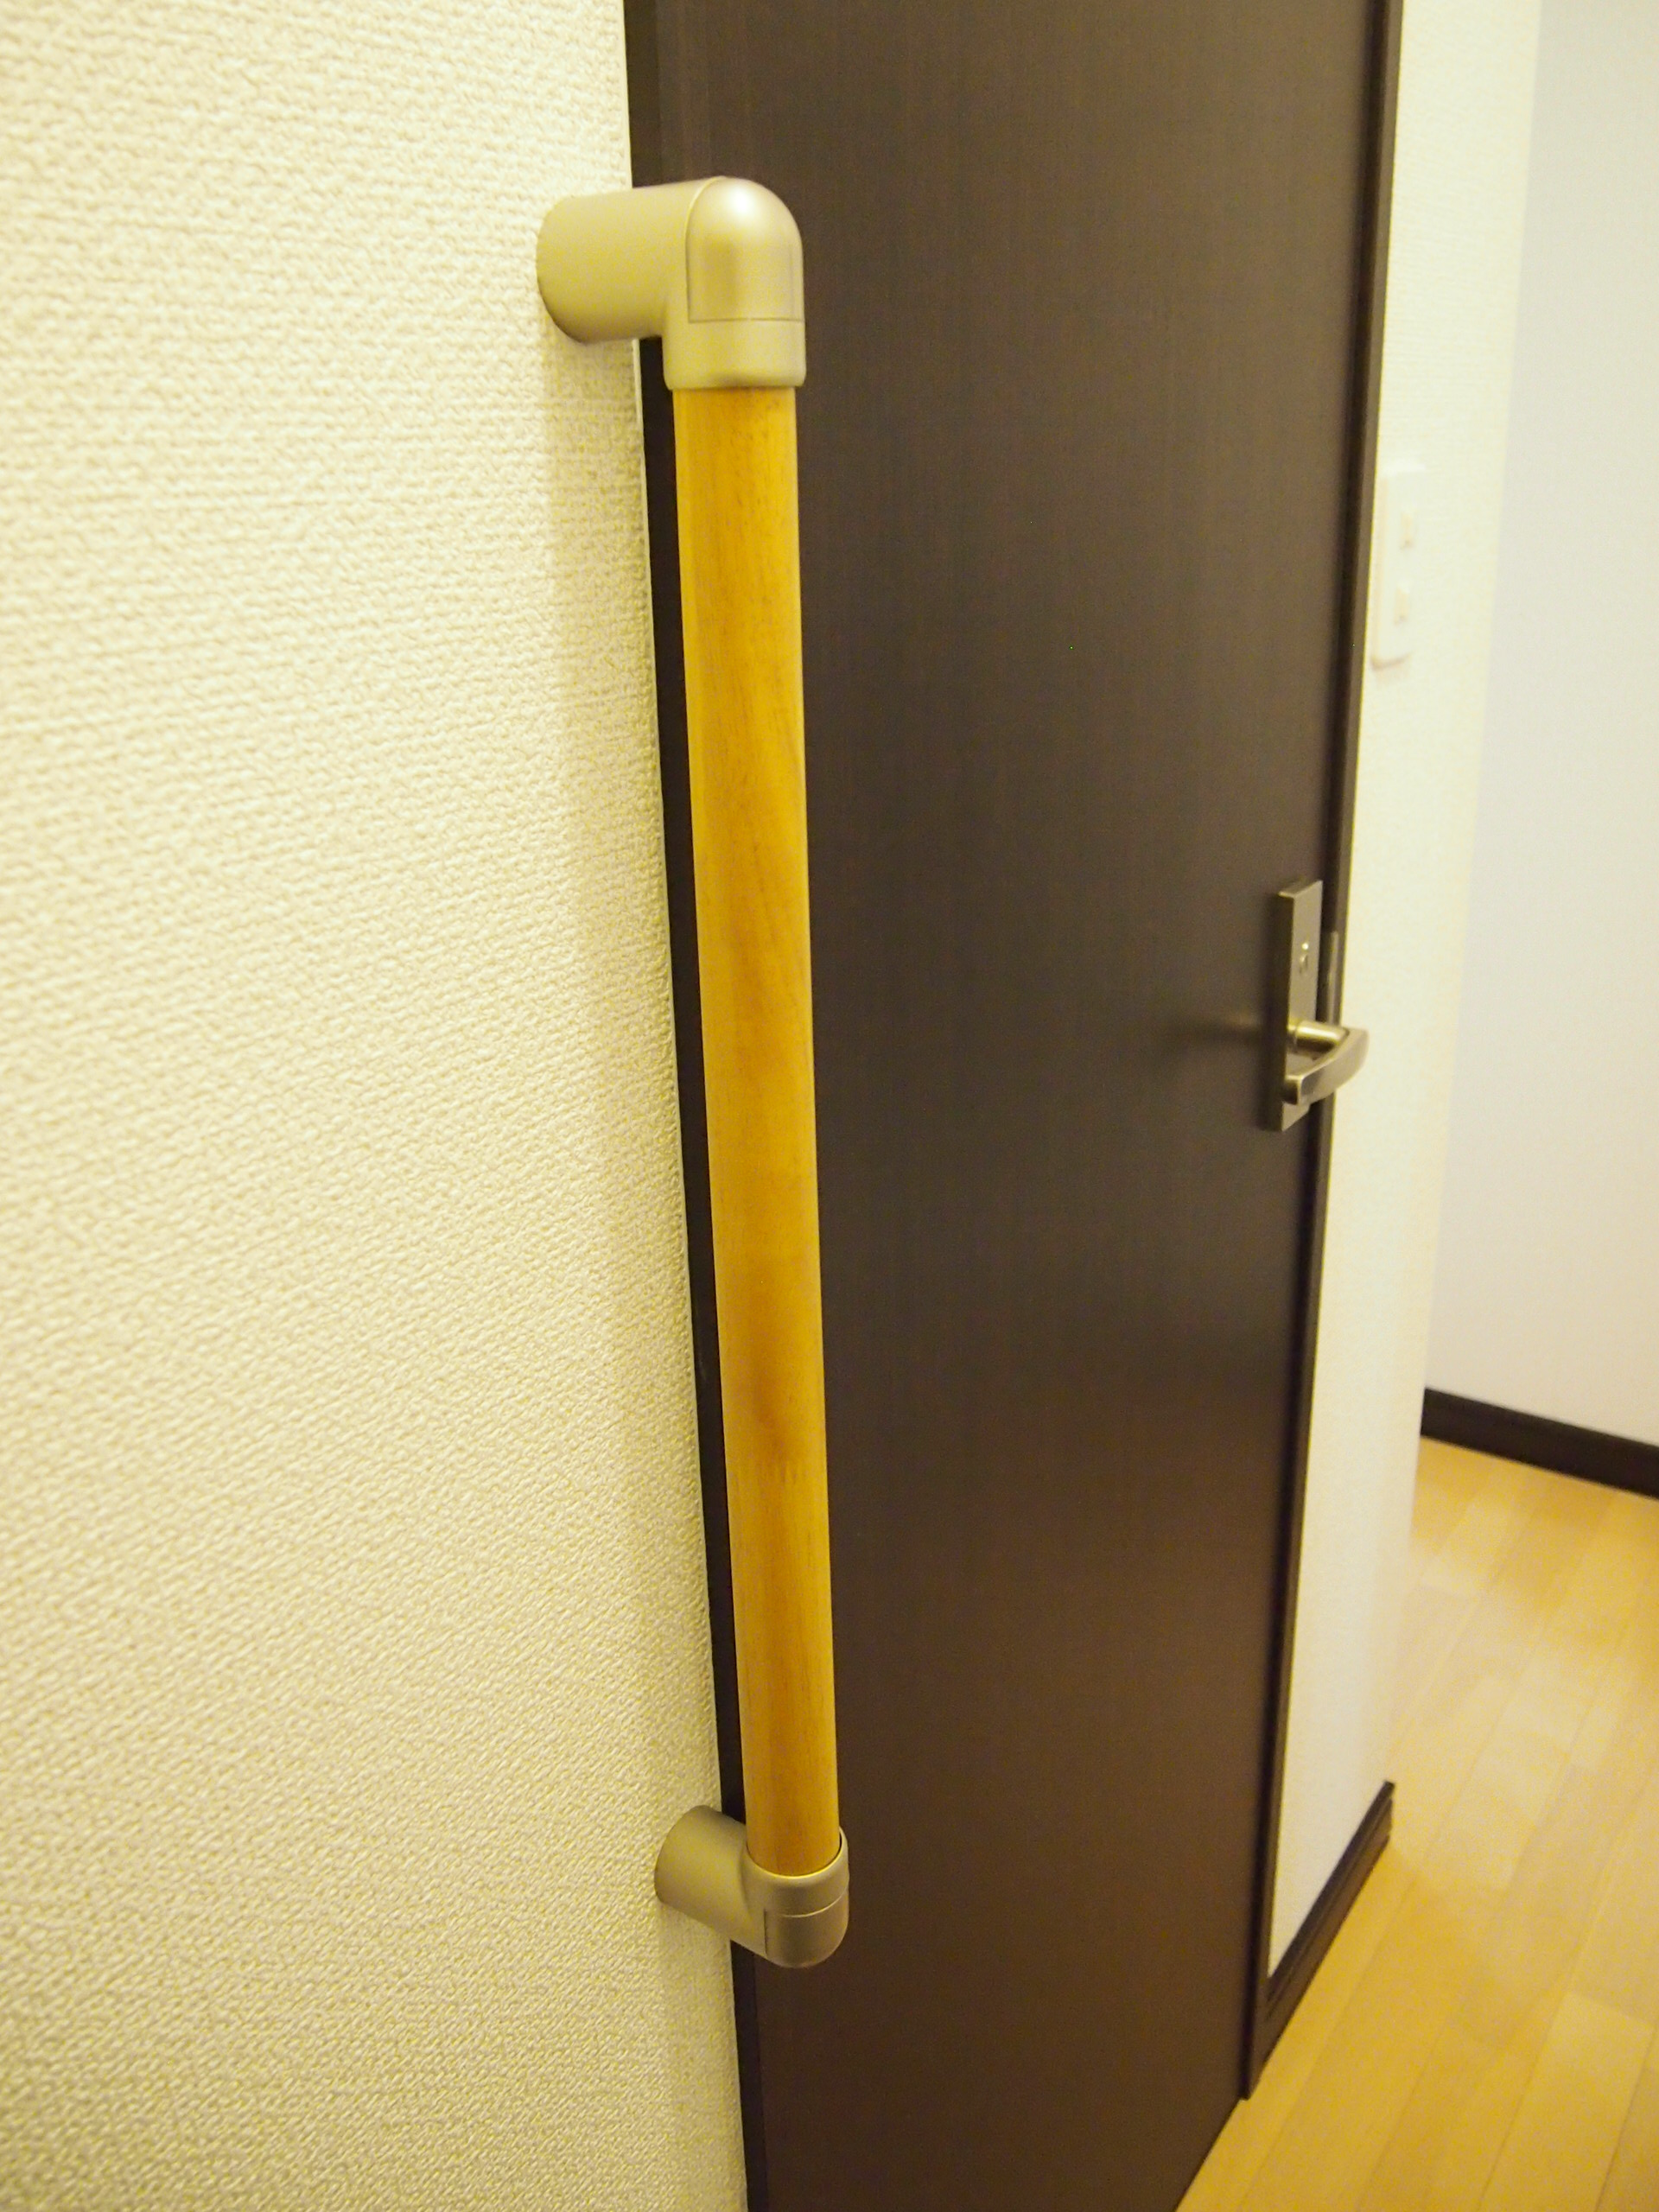 Other Equipment. Entrance ・ It comes with Ri handrail to utility